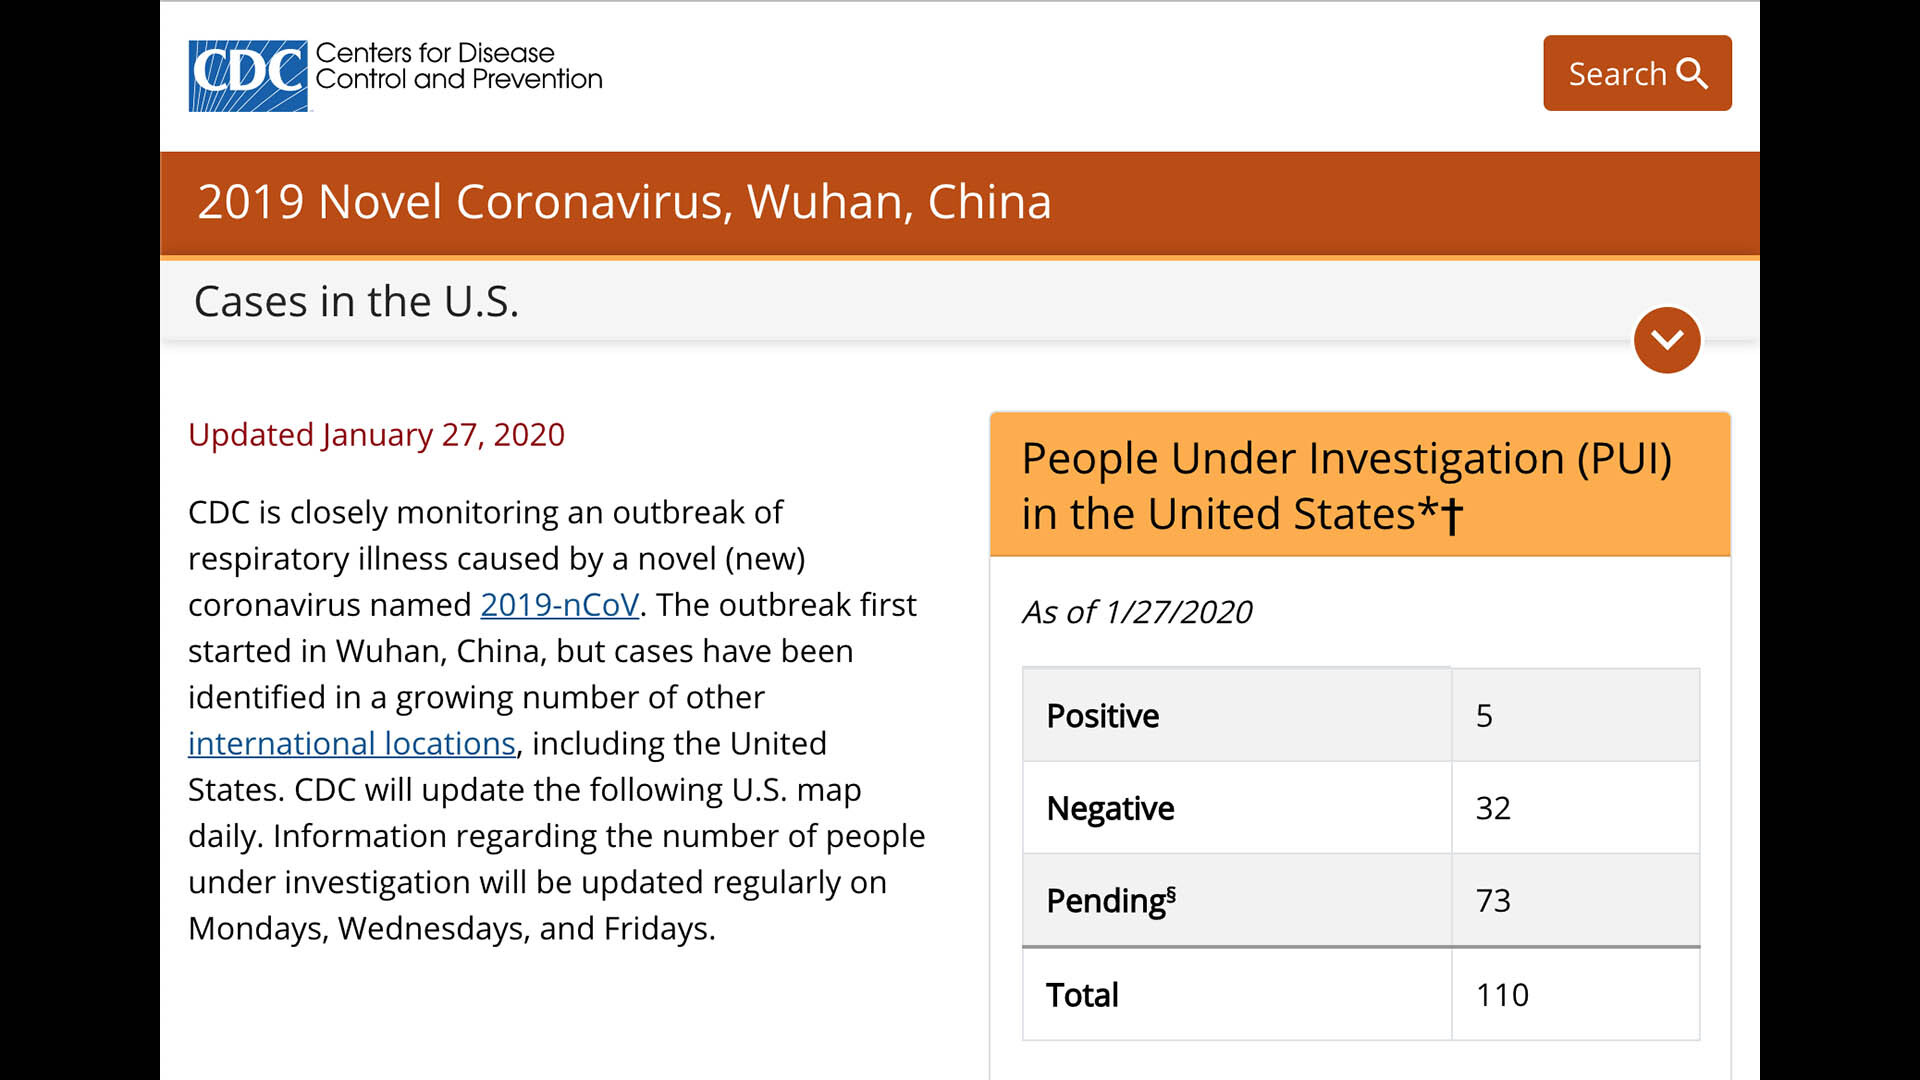 CDC: 110 Patients in U.S. Under Observation for Coronavirus1920 x 1080